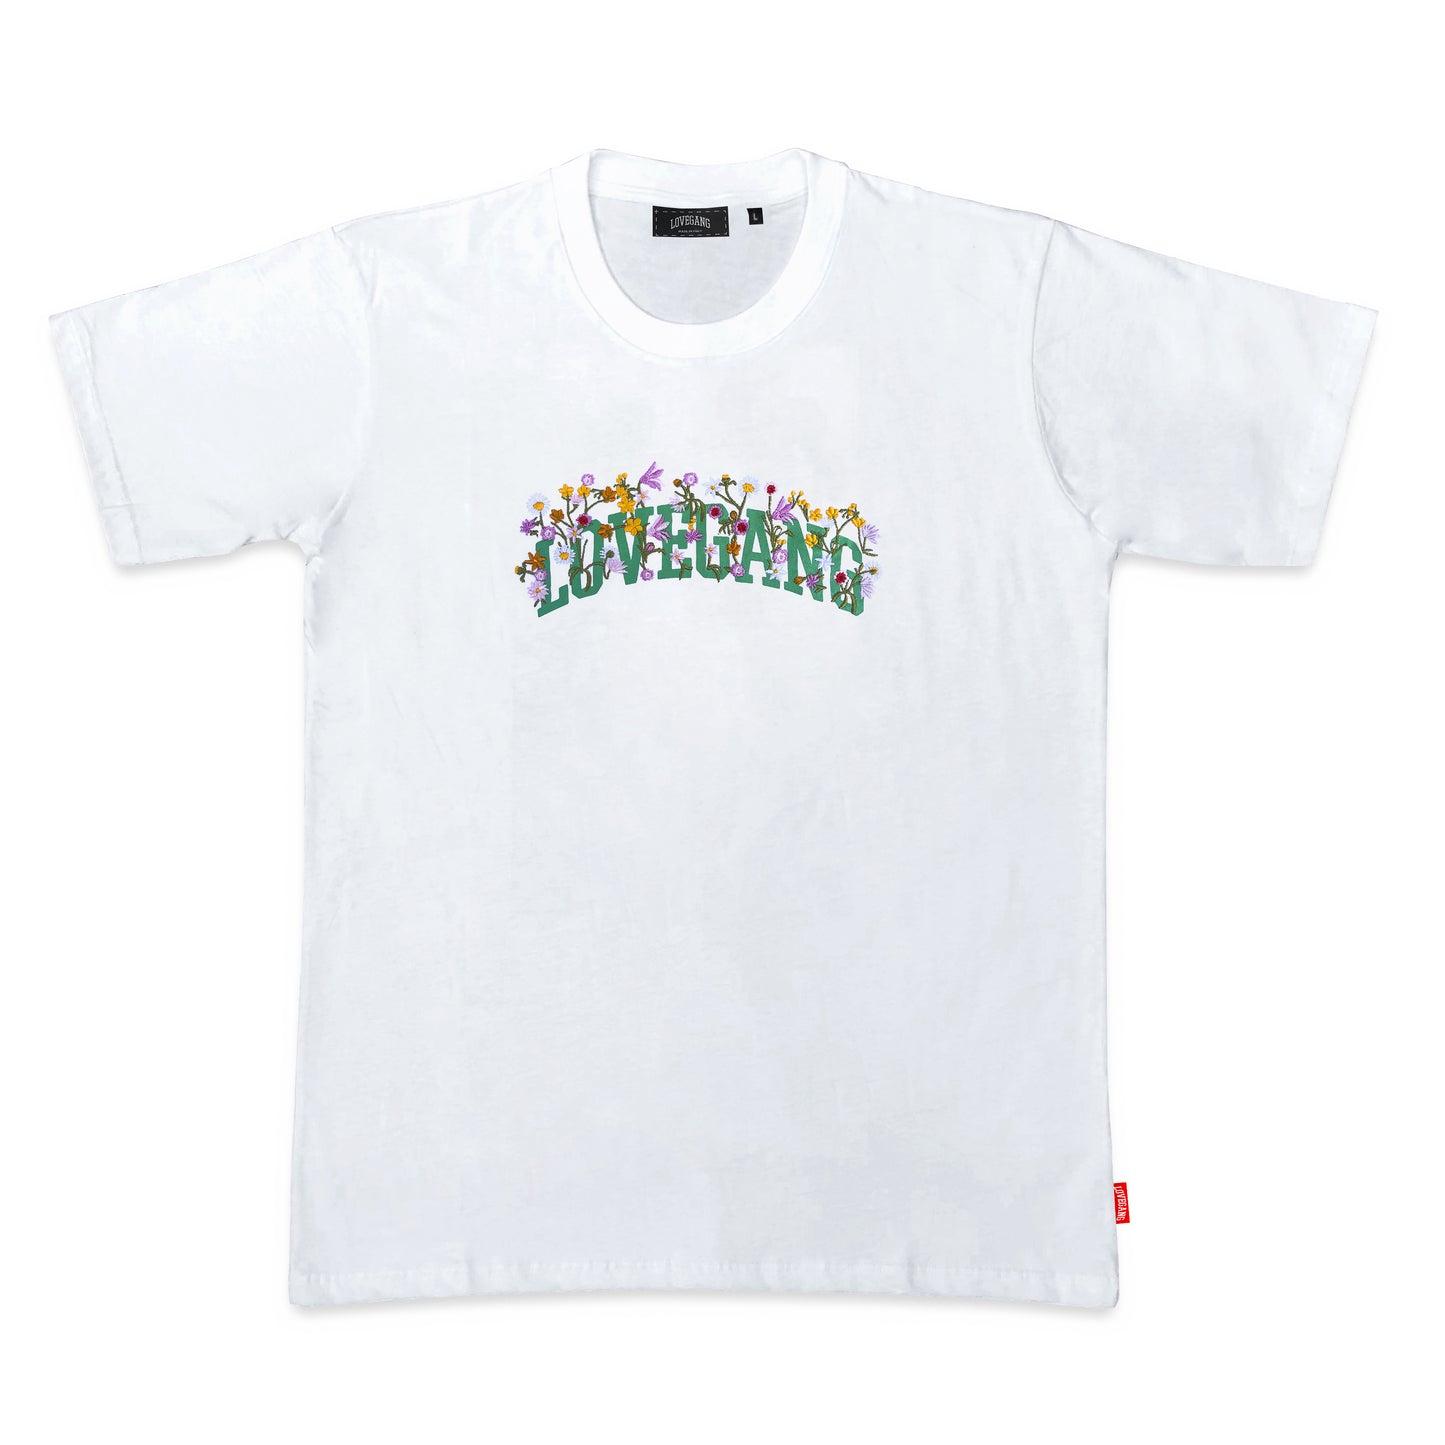 BLOOM '20 - T-SHIRT (WH)